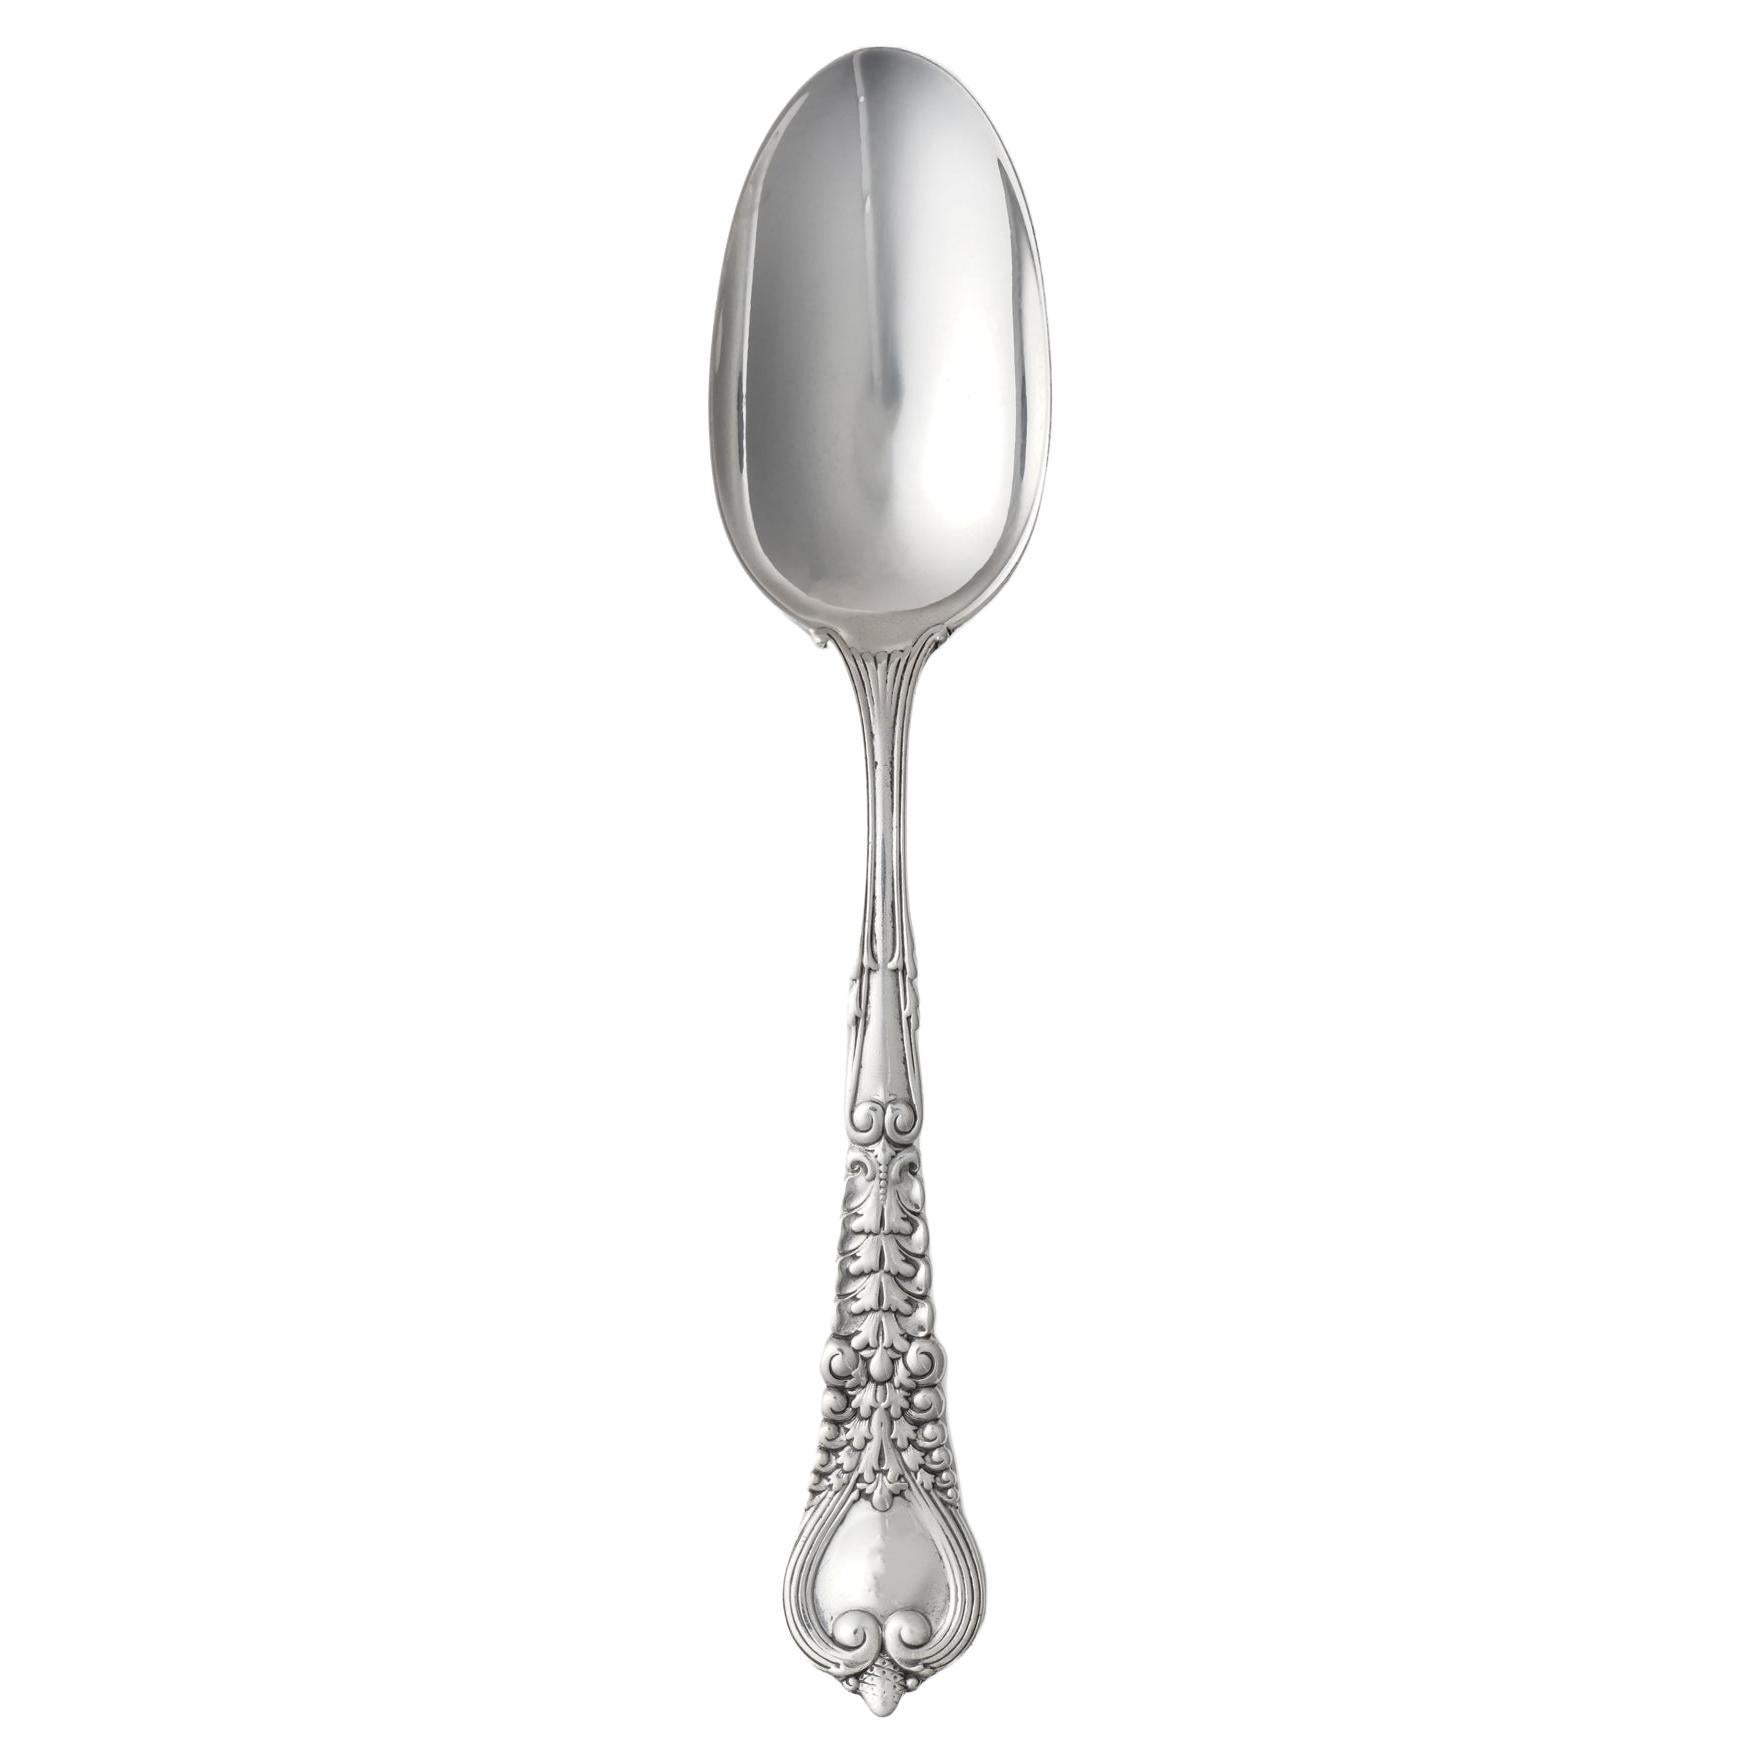 Antique Tiffany & Co. Sterling Silver Florentine Pattern Large Spoon For Sale